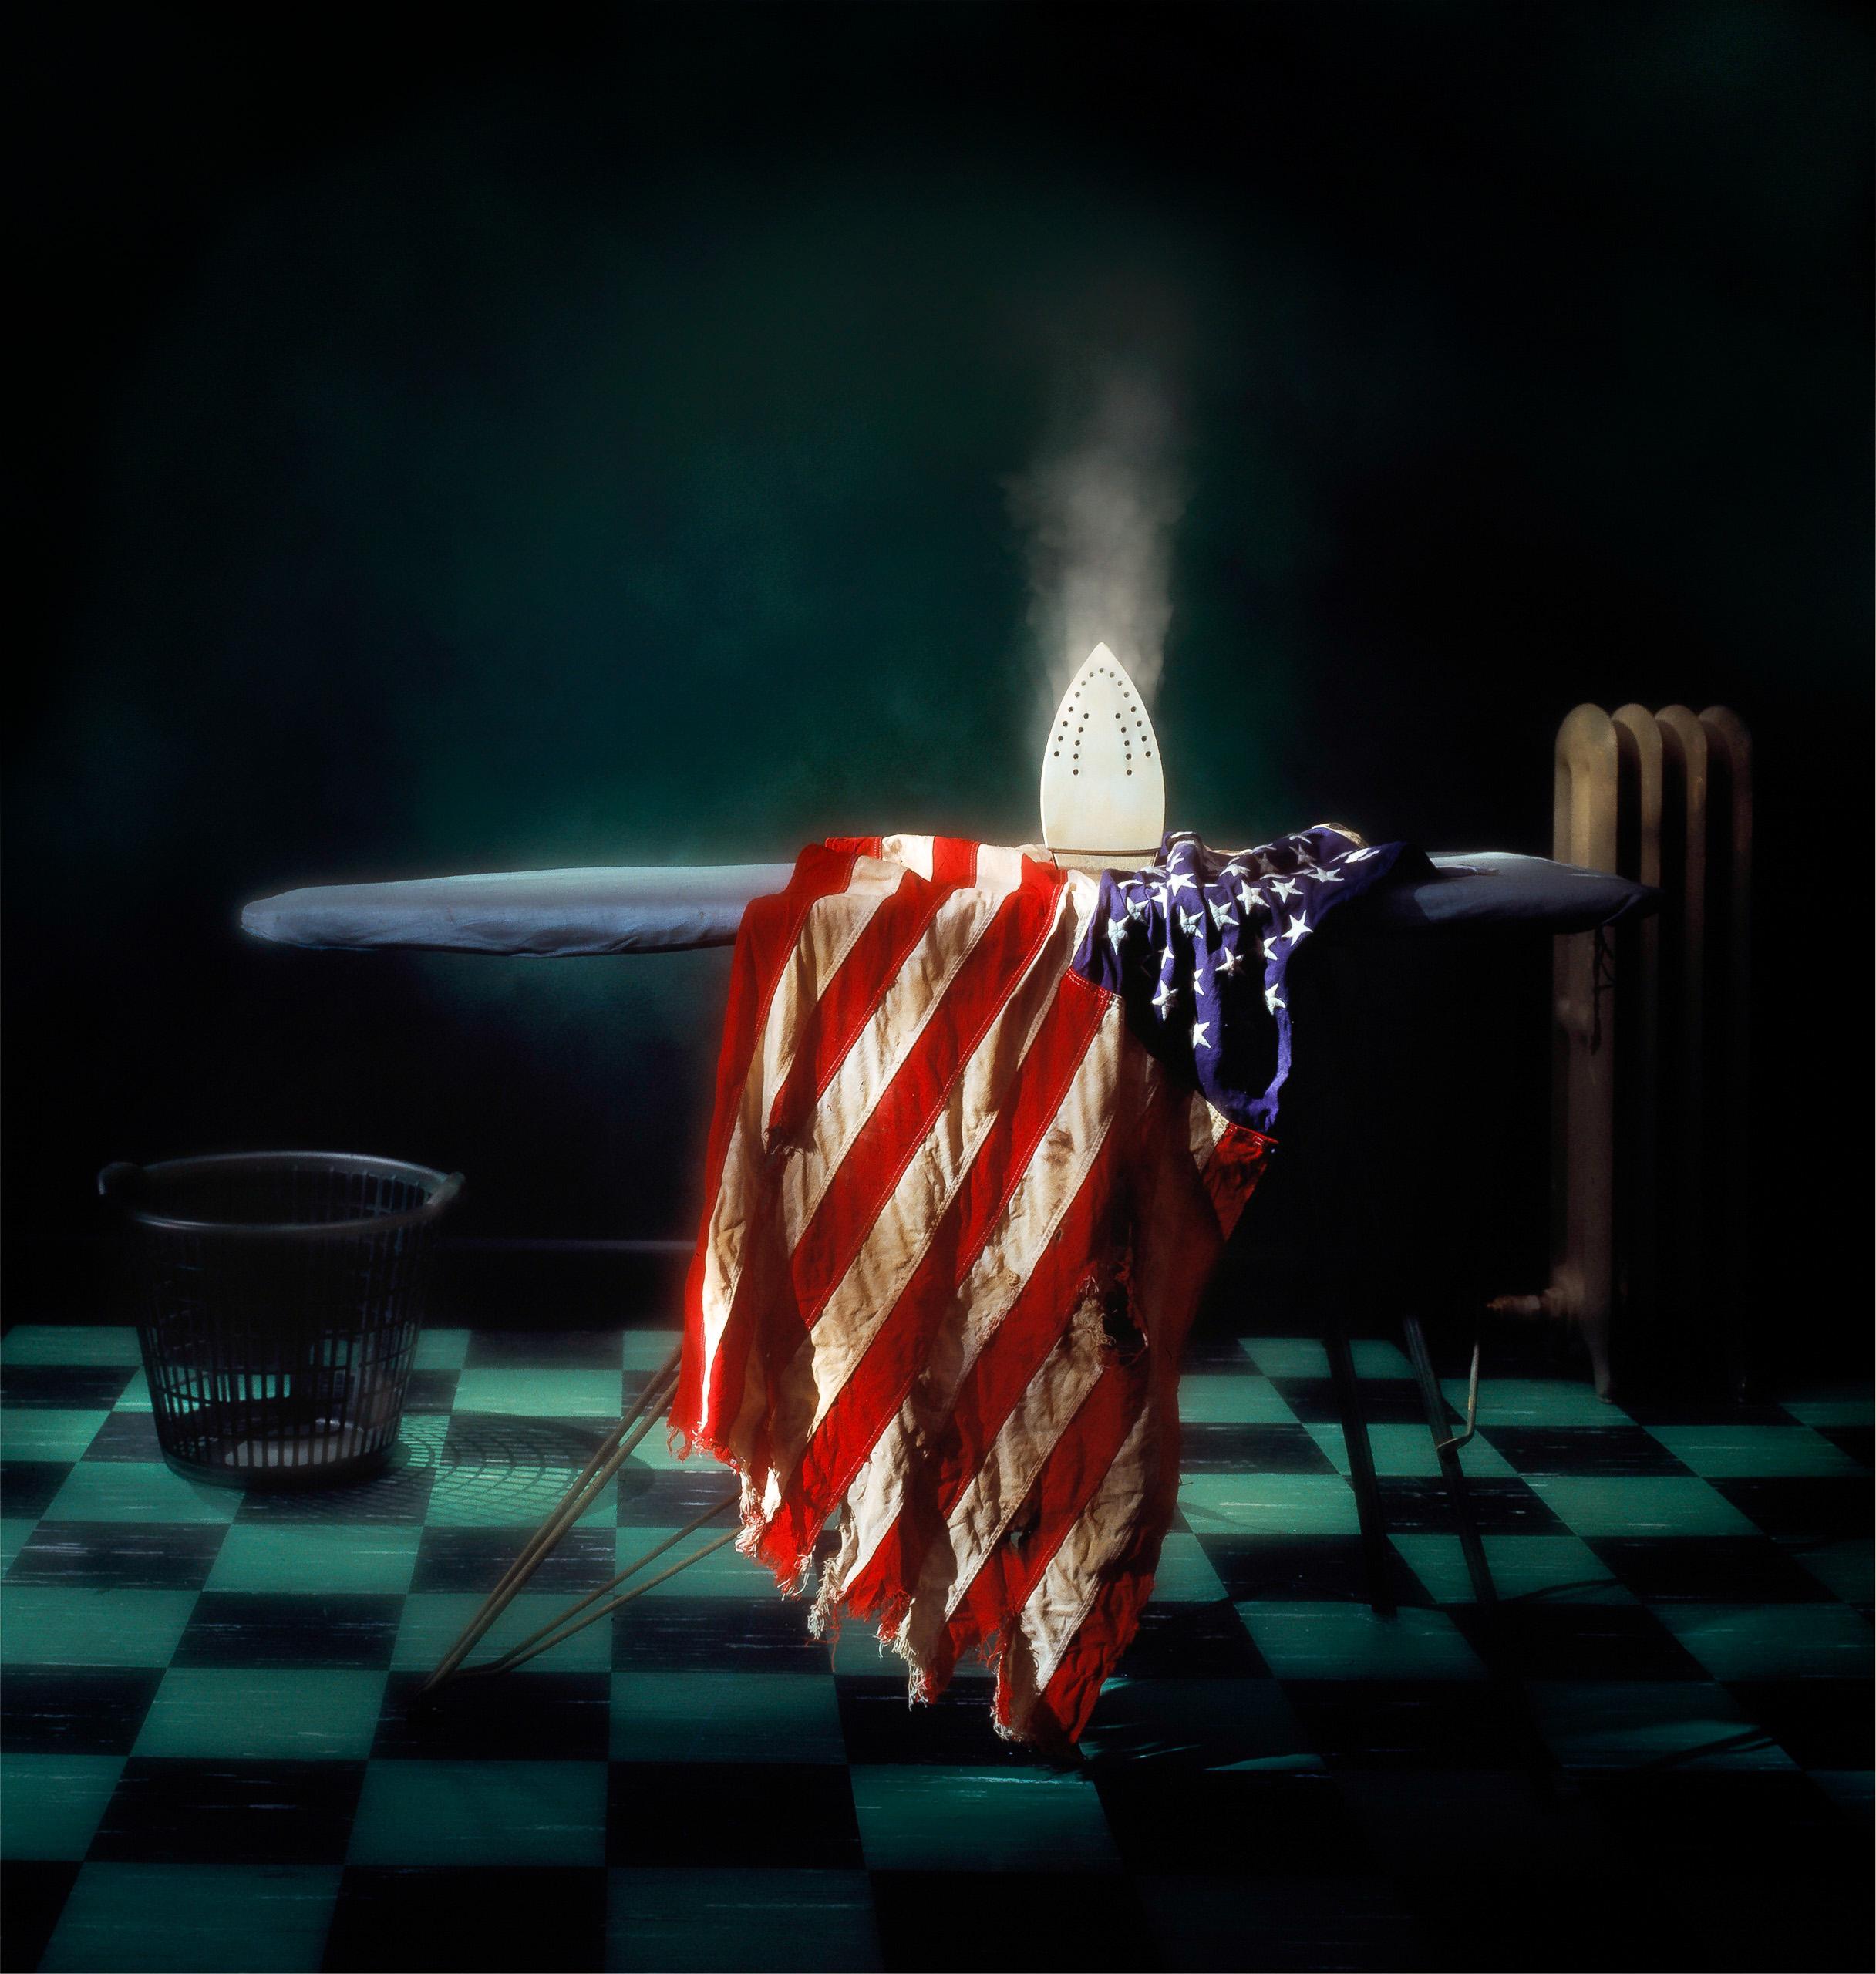 Ironing out America’s Problems - Photograph by Nick Vedros